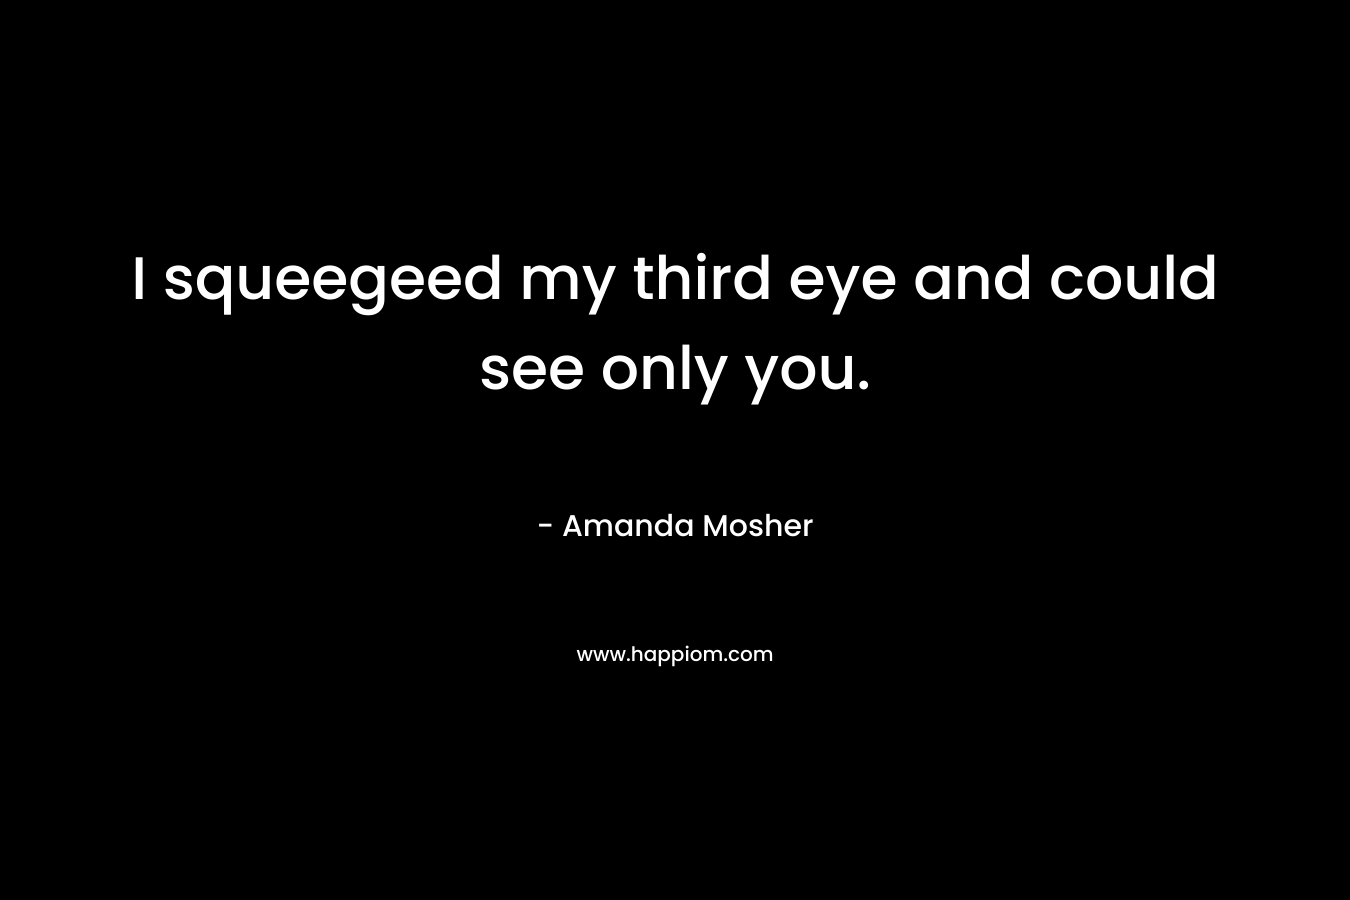 I squeegeed my third eye and could see only you.